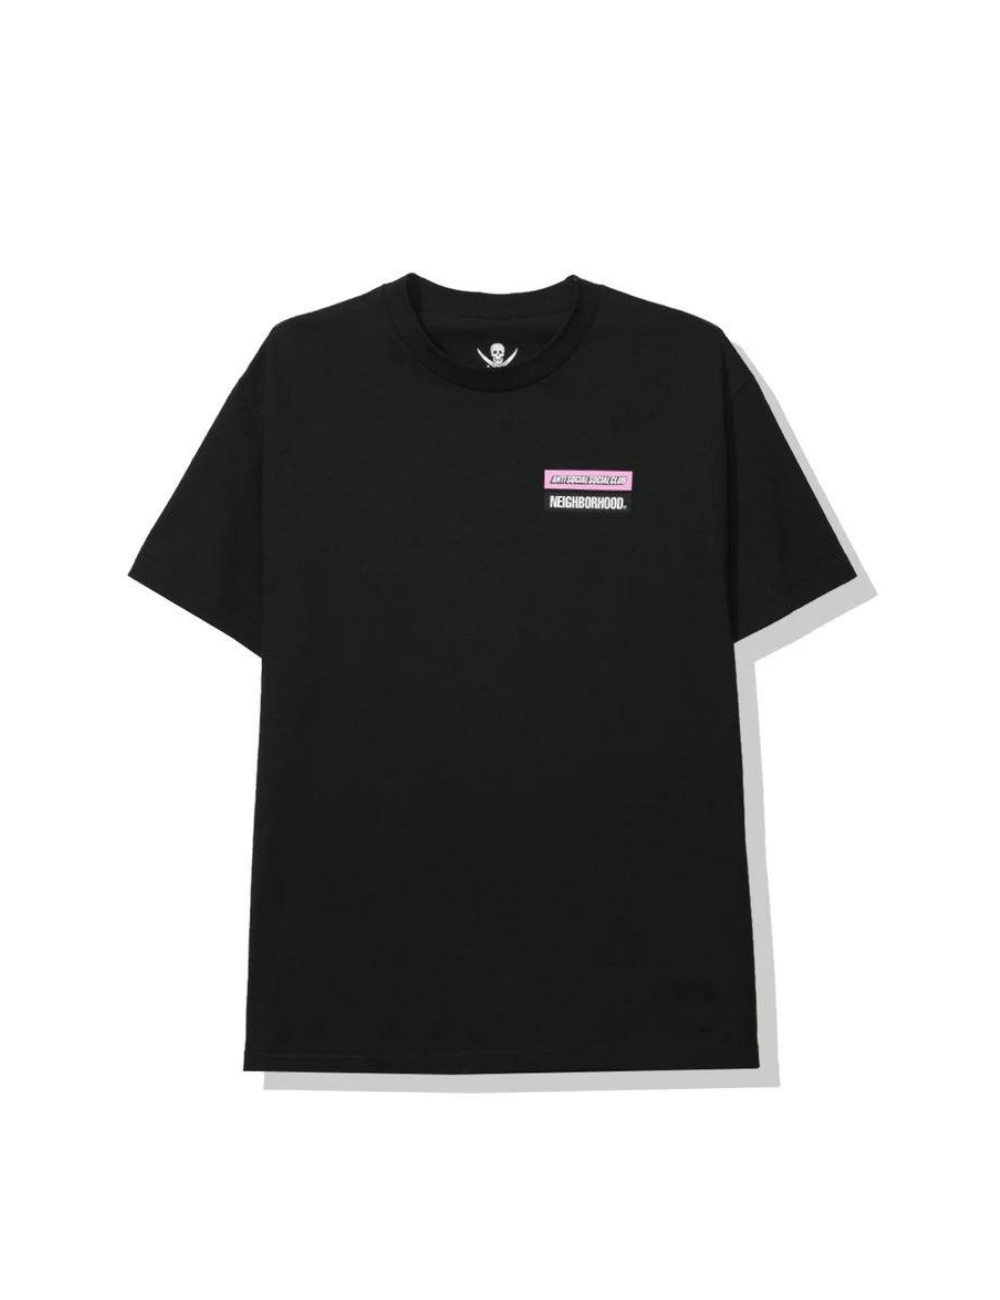 Anti Social Social Club x Neighborhood 'Stuck On You' Tee (Black) - Shop Streetwear, Sneakers, Slippers and Gifts online | Malaysia - The Factory KL